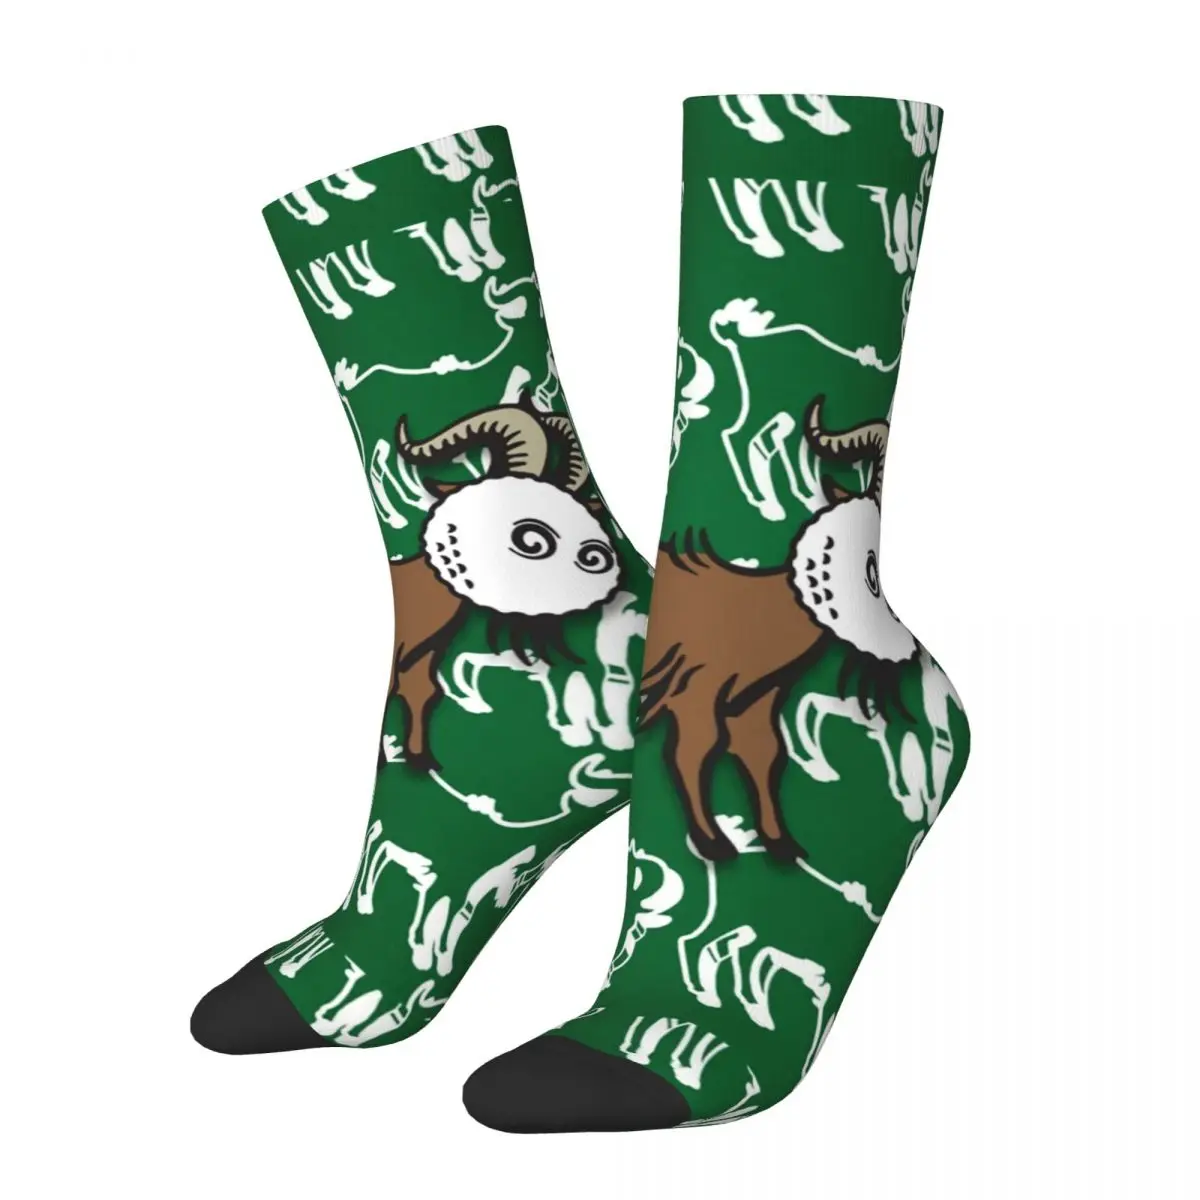 

Funny Crazy compression Sock for Men Goat Hip Hop Vintage Malbon Golf Happy Quality Pattern Printed Boys Crew Sock Casual Gift